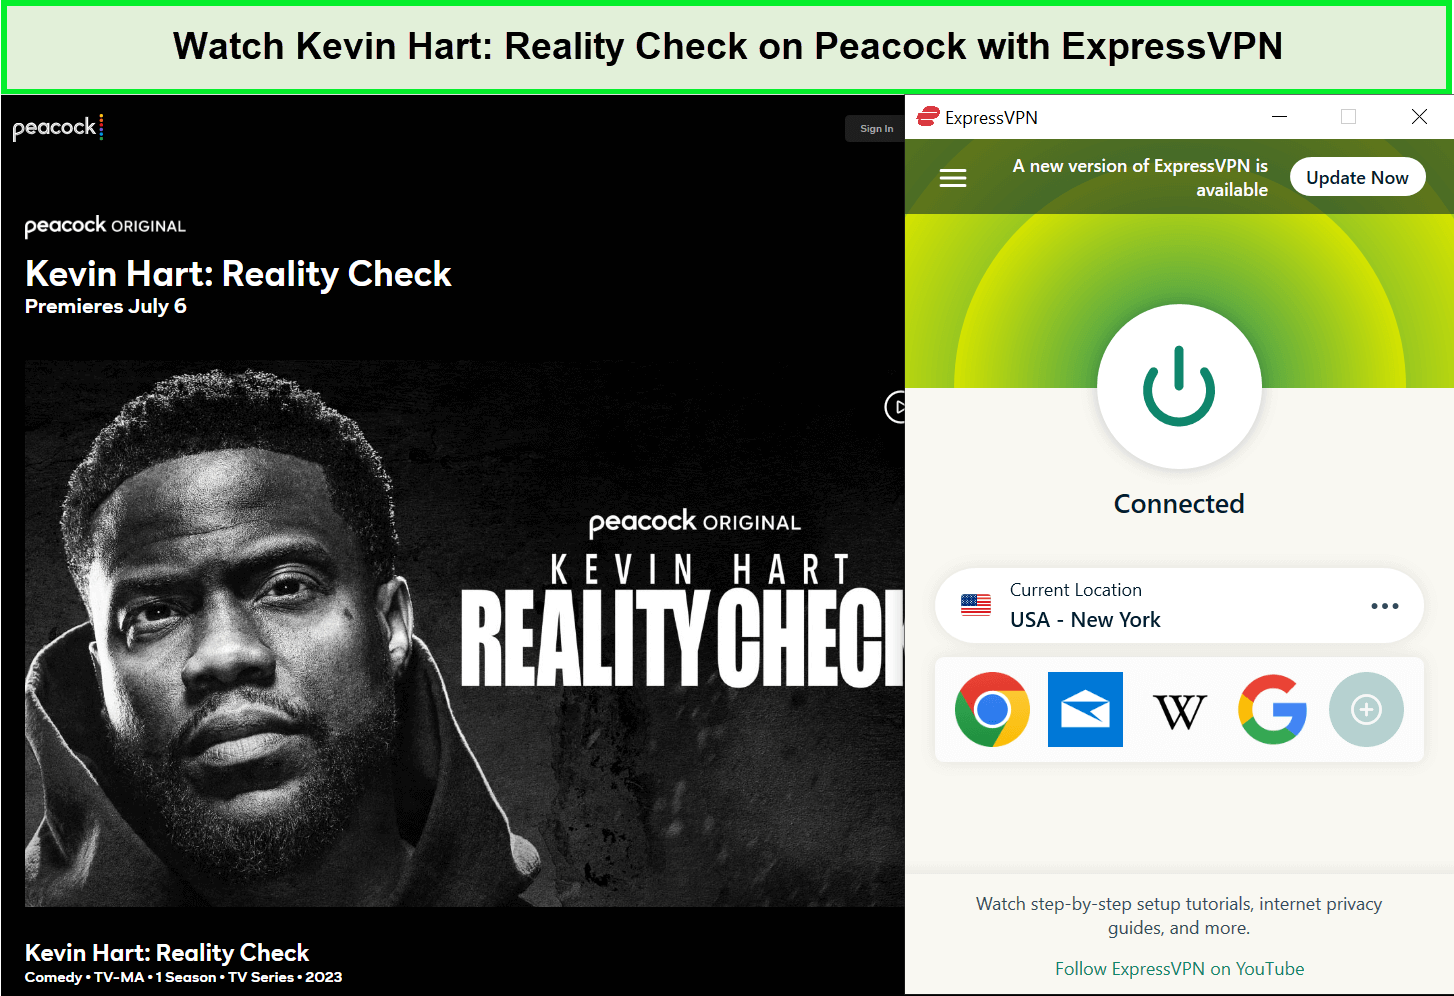 Watch-Kevin-Hart-Reality-Check-in-Singapore-on-Peacock-with-ExpressVPN